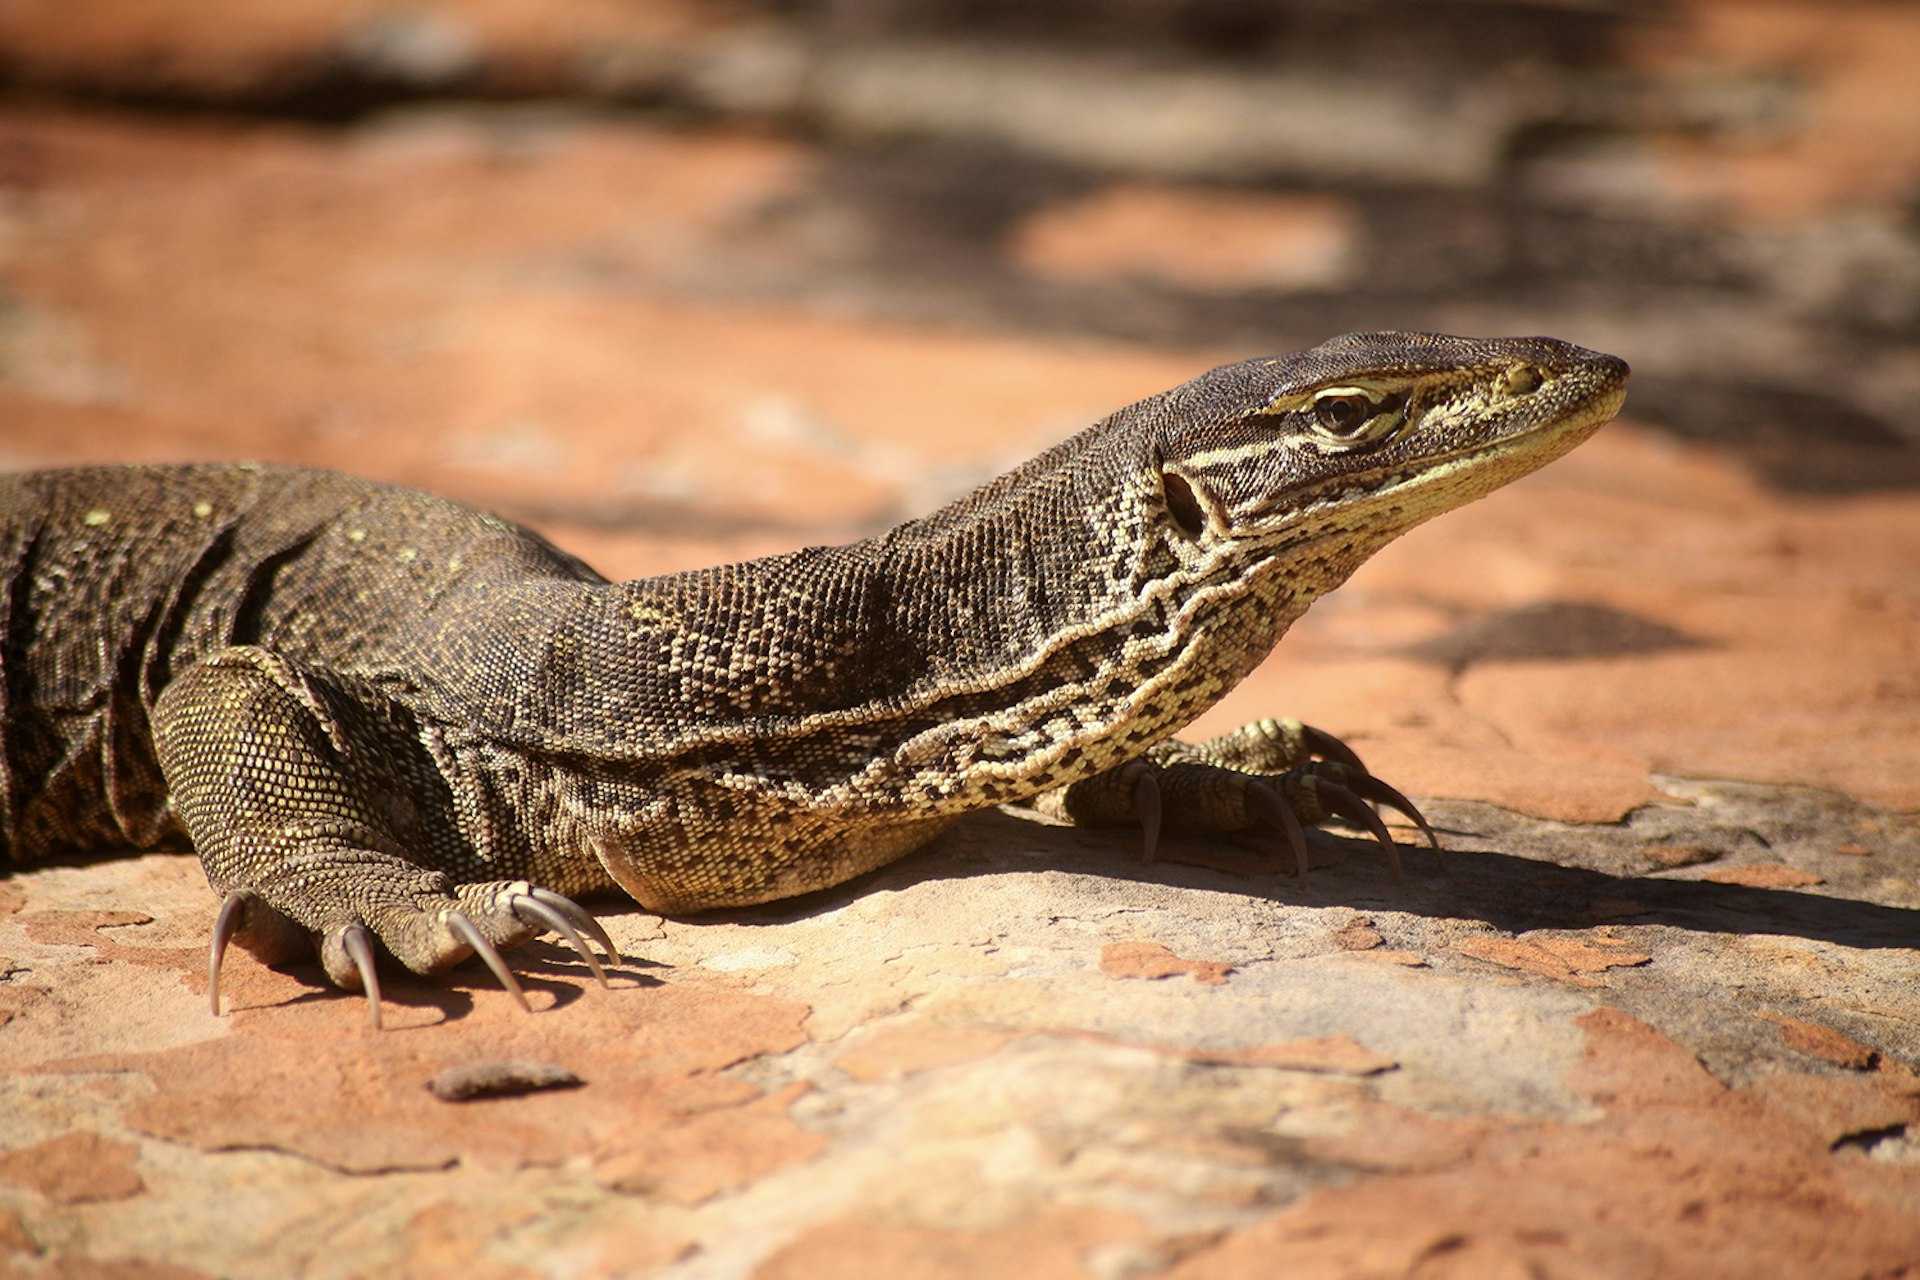 Western Australia's scaly goannas evoke the prehistoric past. Image by Feargus Cooney / Lonely Planet Images / Getty Images